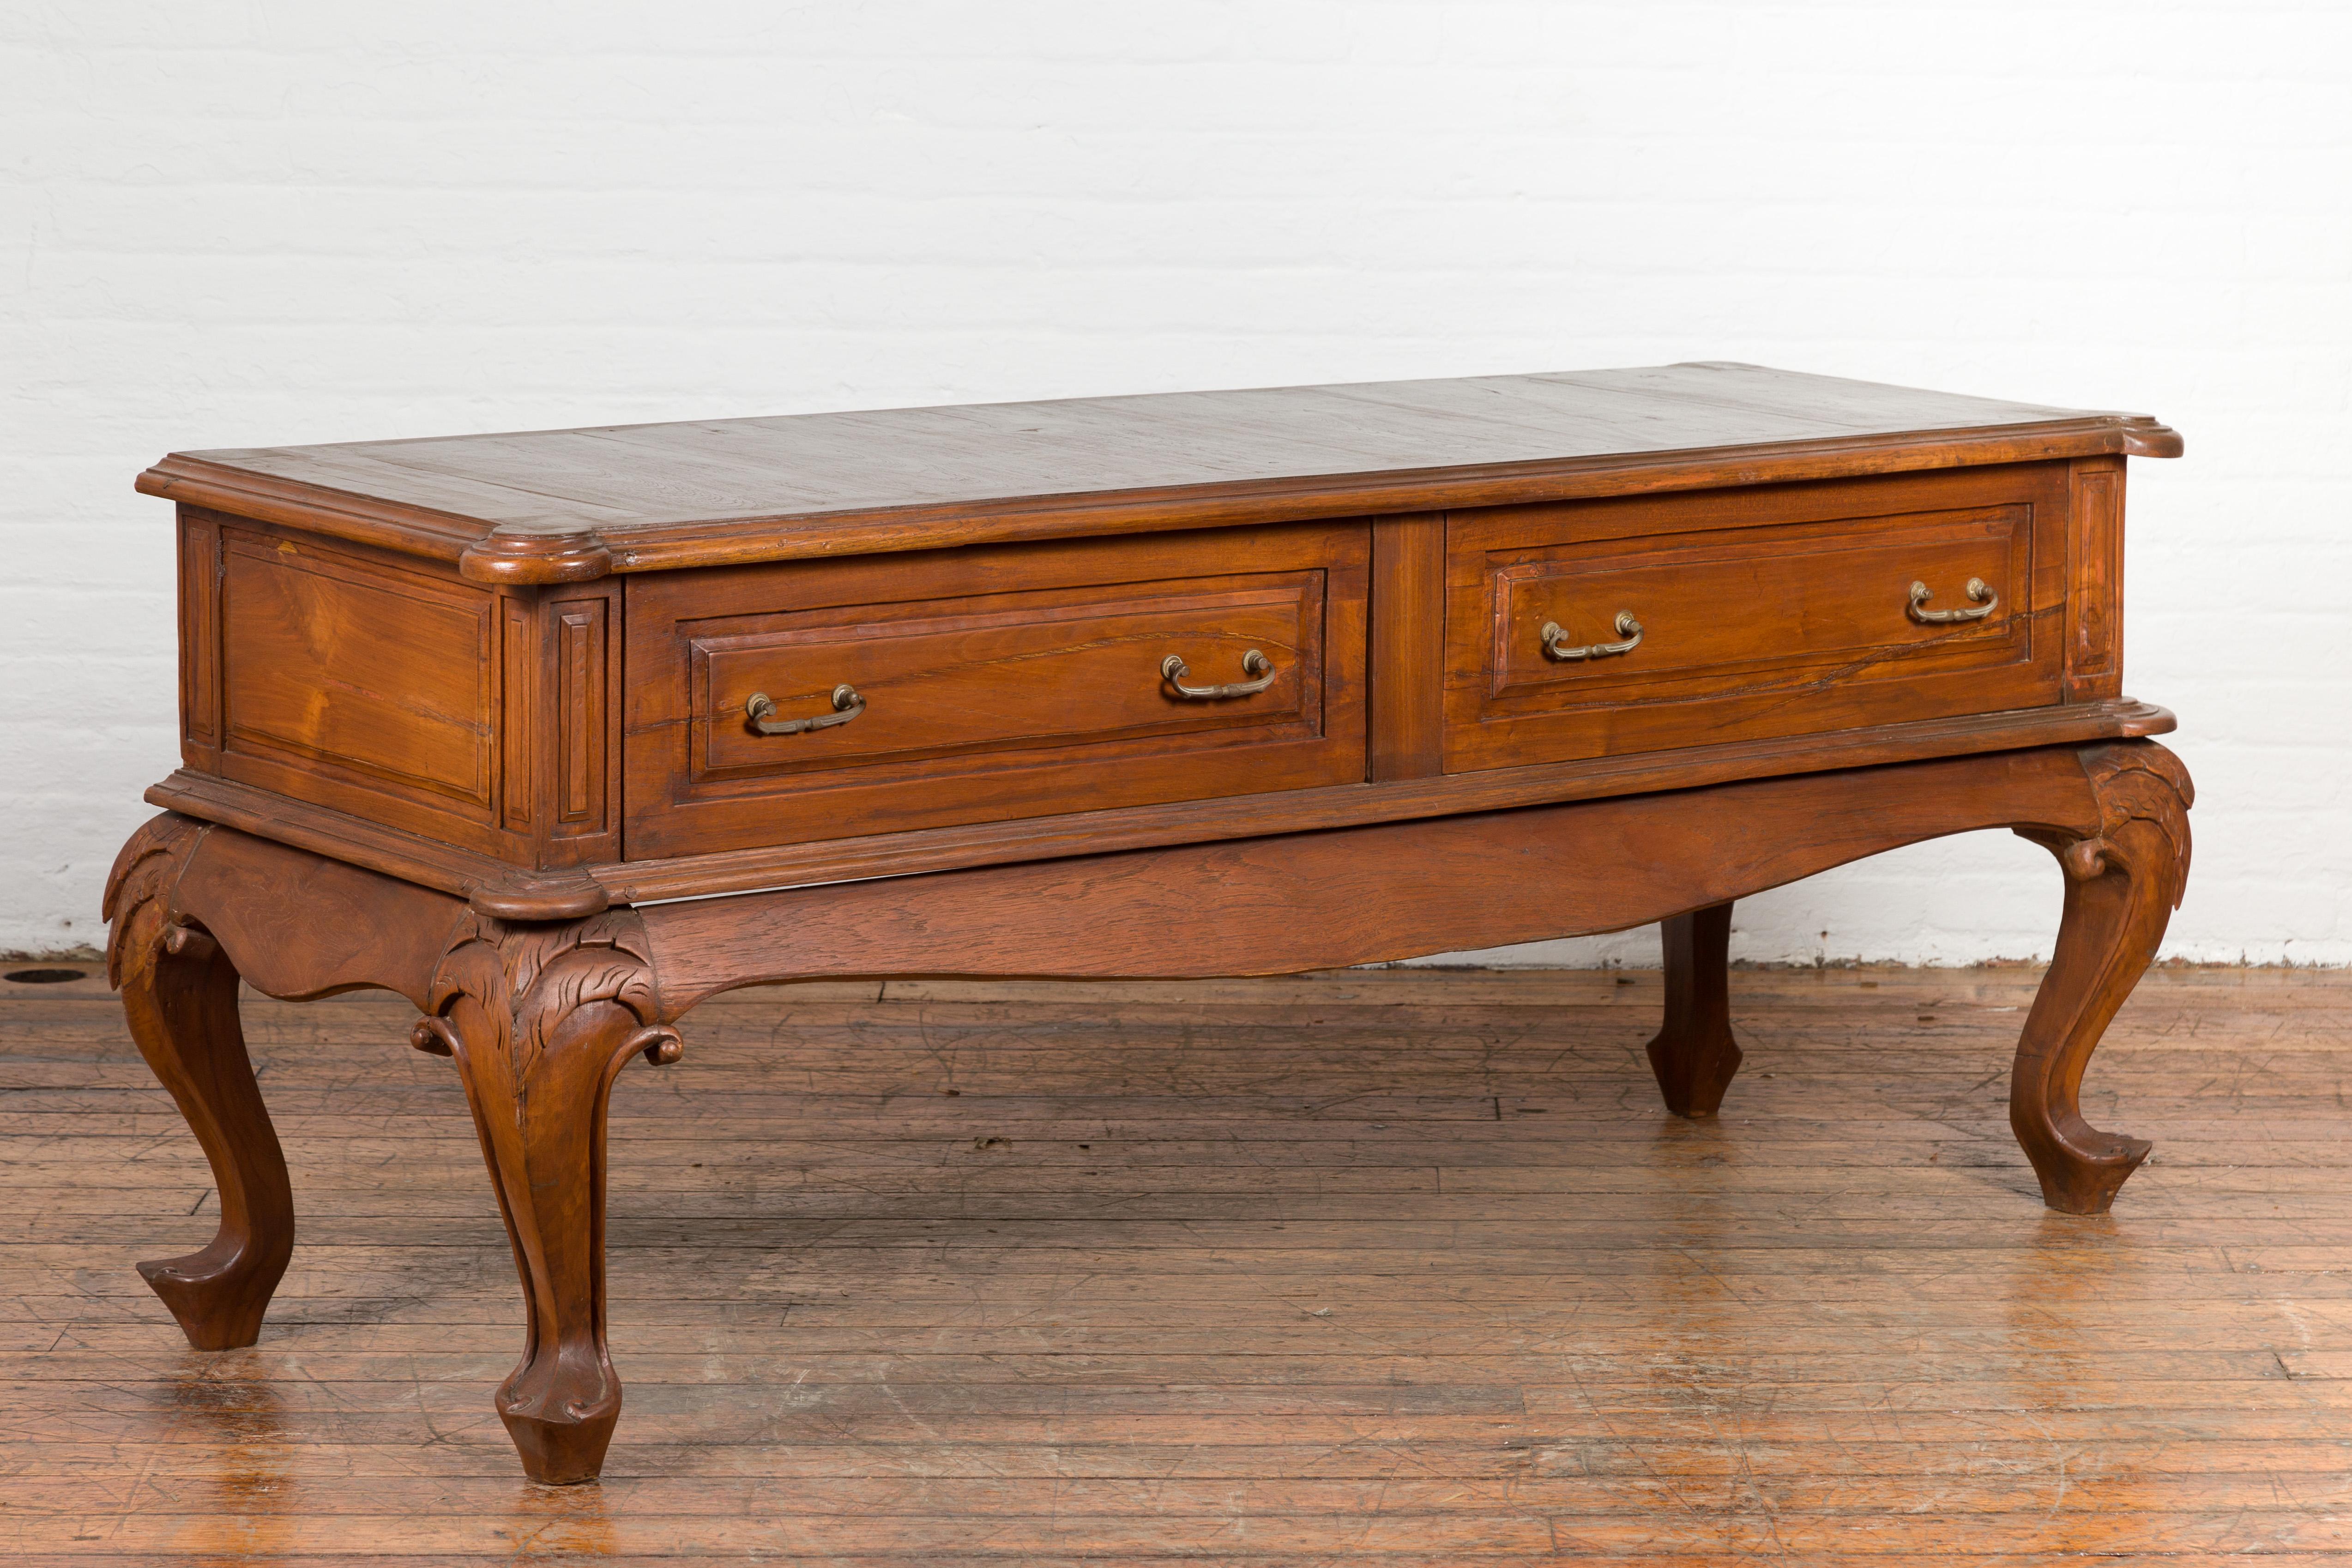 Indonesian Dutch Colonial Early 20th Century Low Table with Two Drawers and Cabriole Legs For Sale